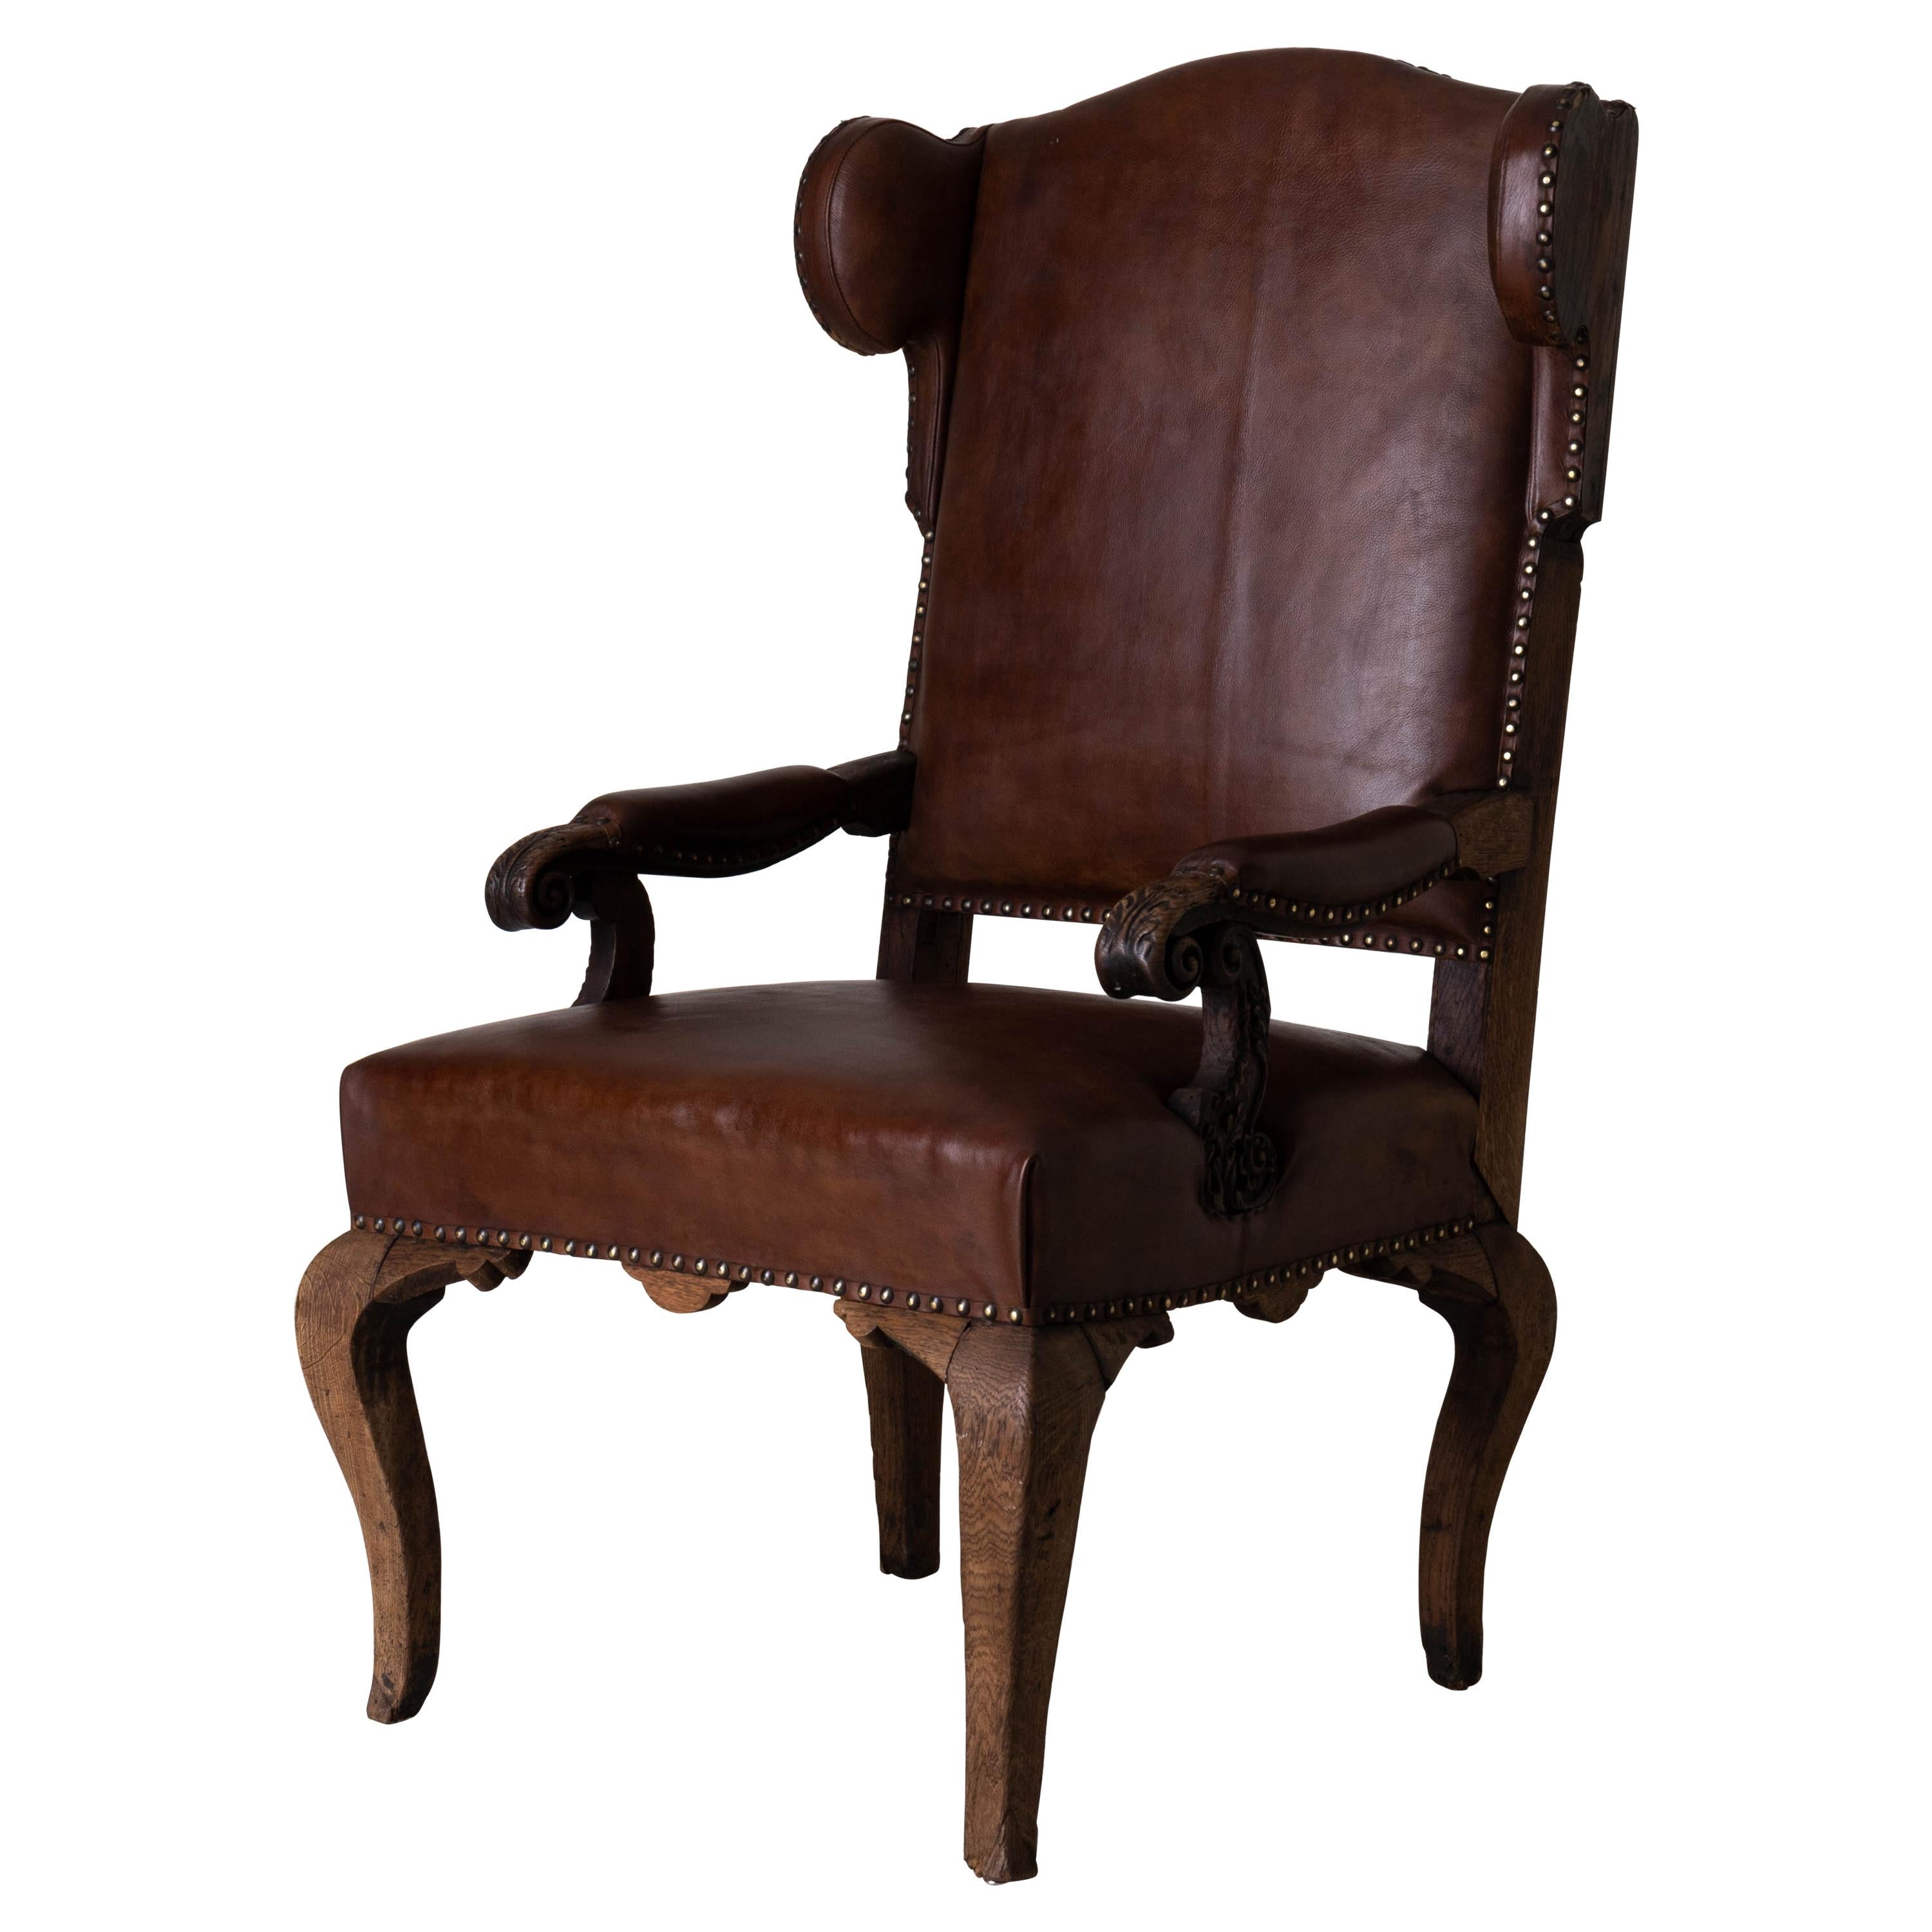 Armchair French Wingback Rococo Period 18th Century France